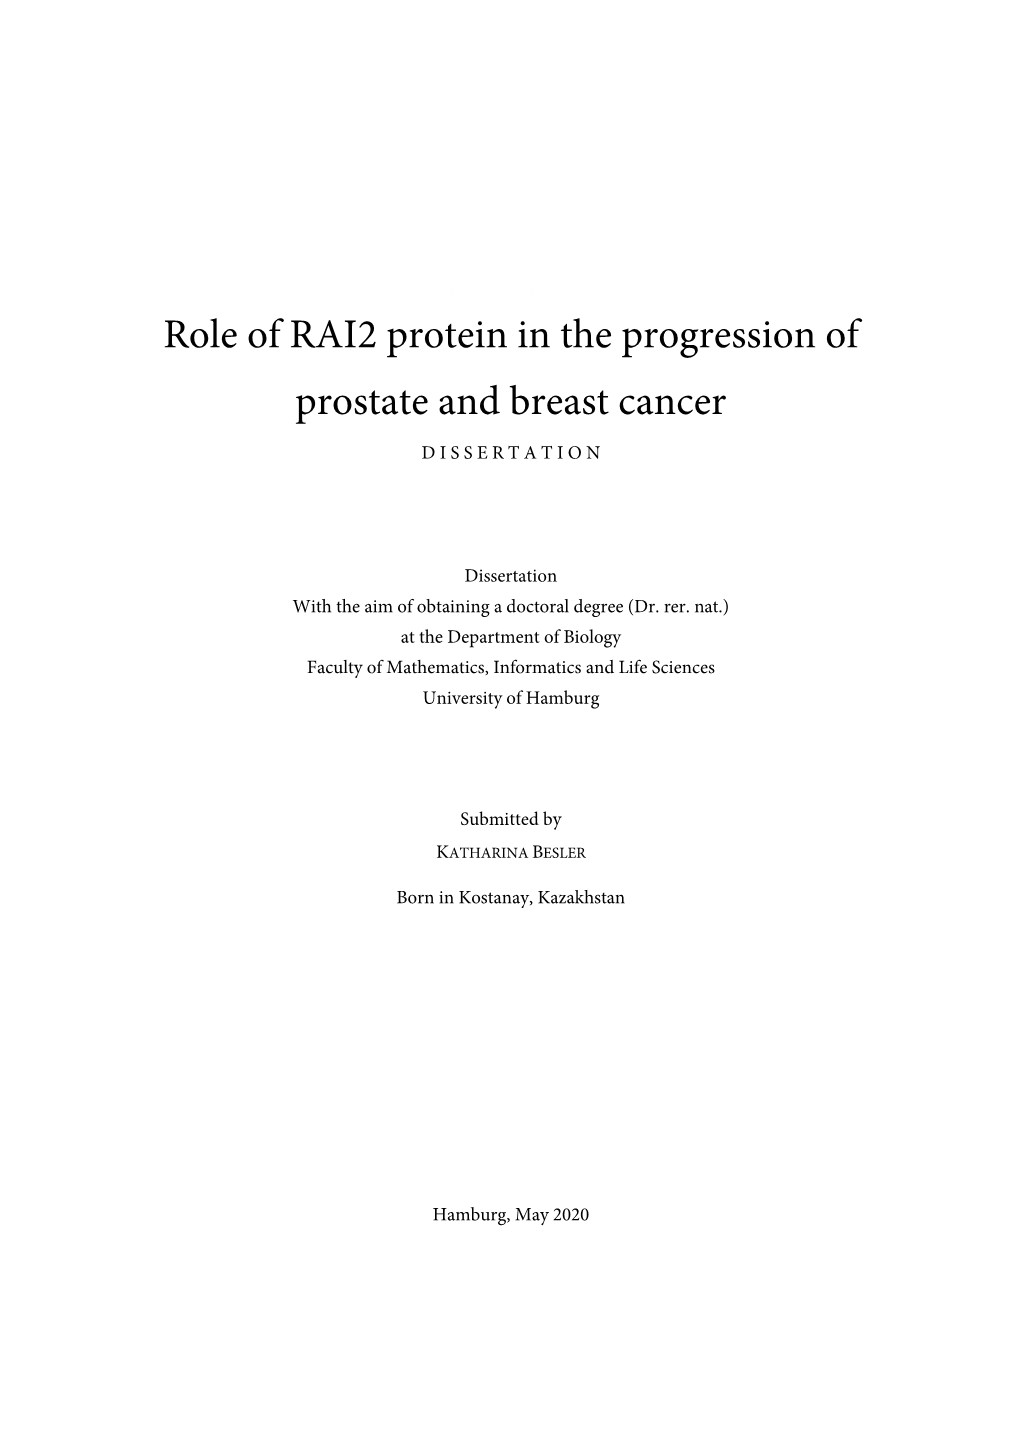 Role of RAI2 Protein in the Progression of Prostate and Breast Cancer